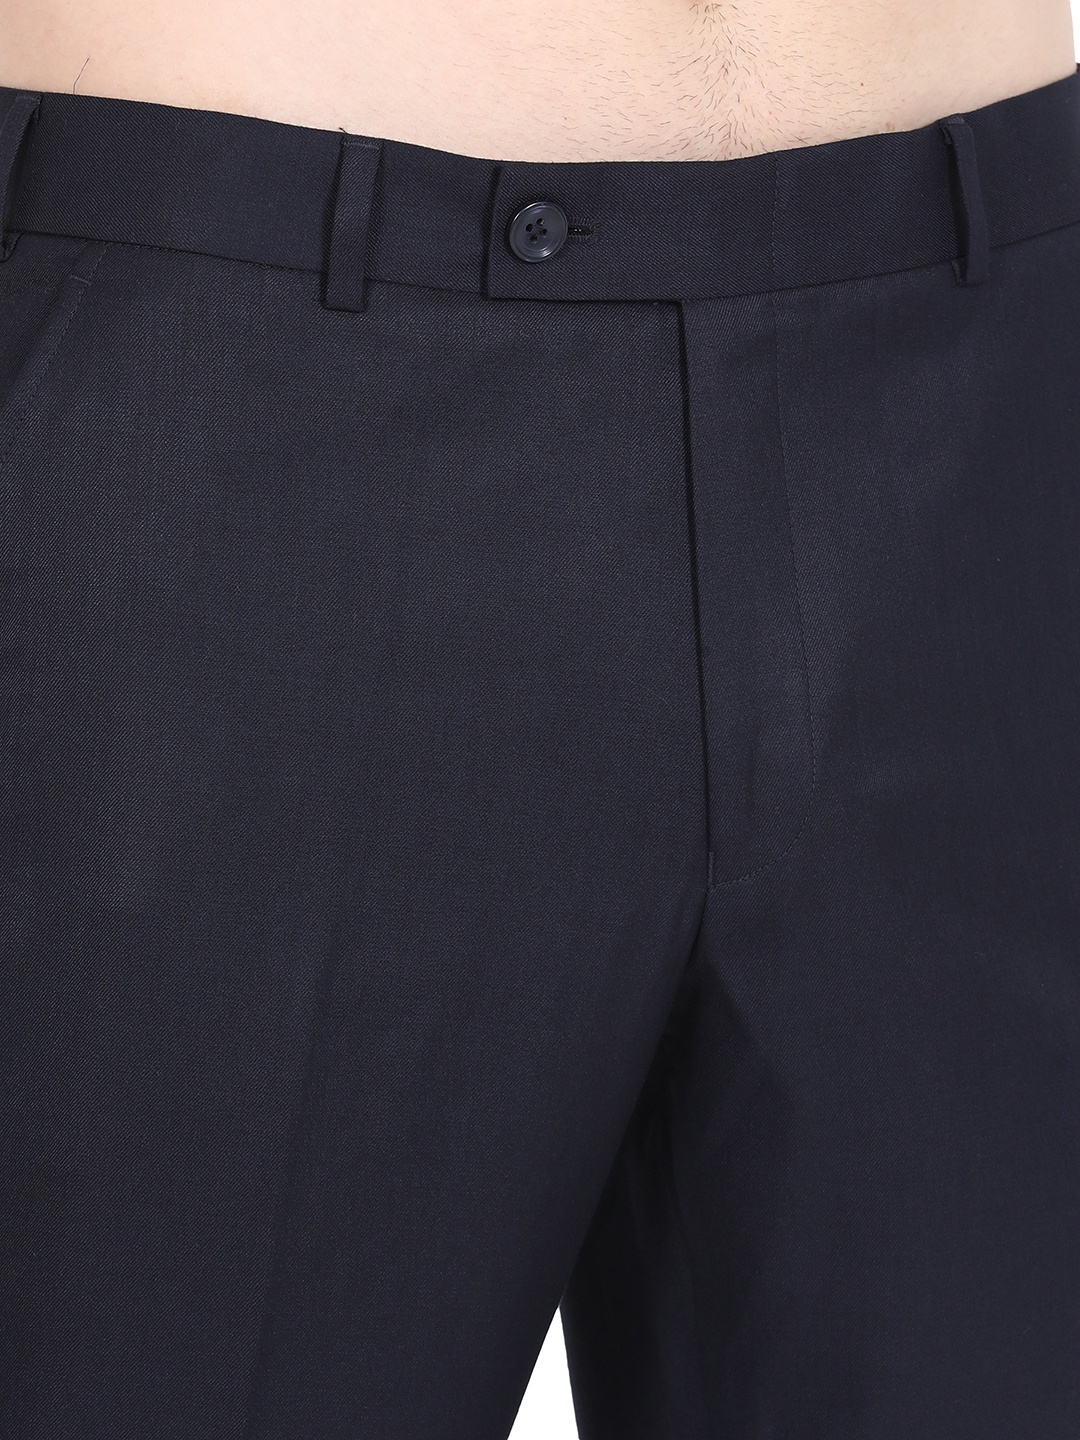 Blue Solid Classic fit Formal Trouser | Greenfibre